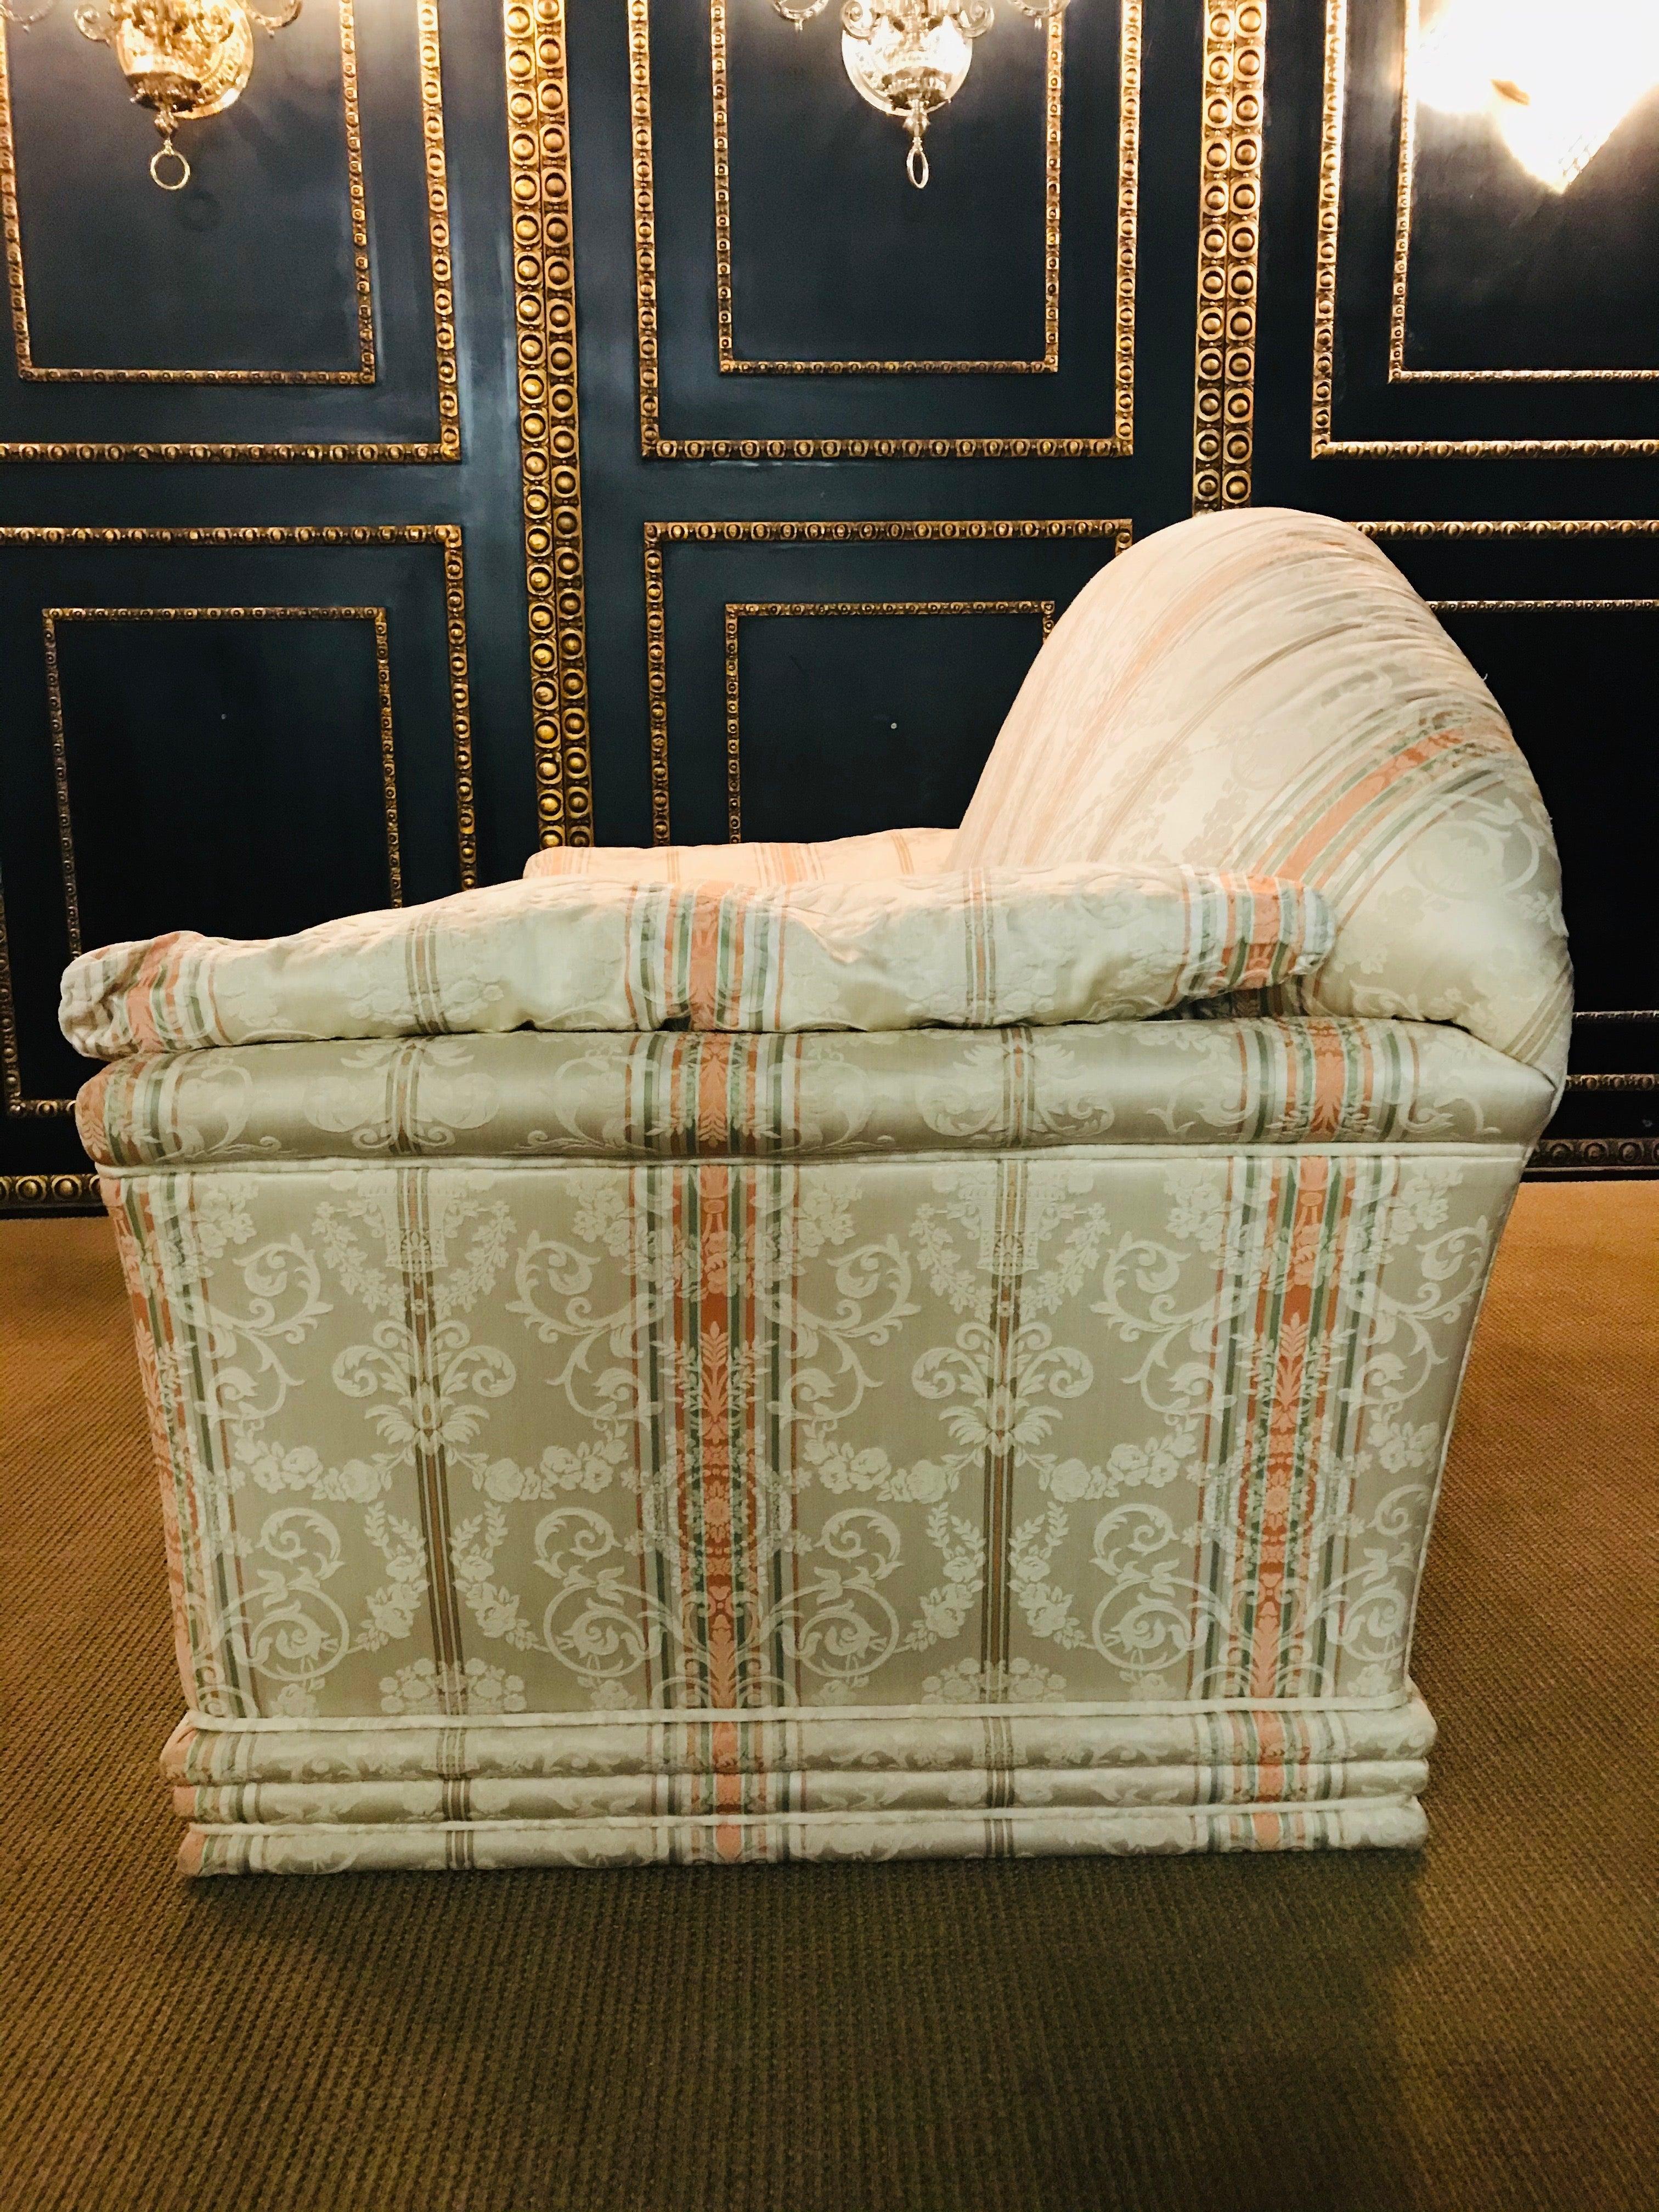 Very High-Quality Couch Set from the Bielefeld Workshops with Baroque Patterns 10